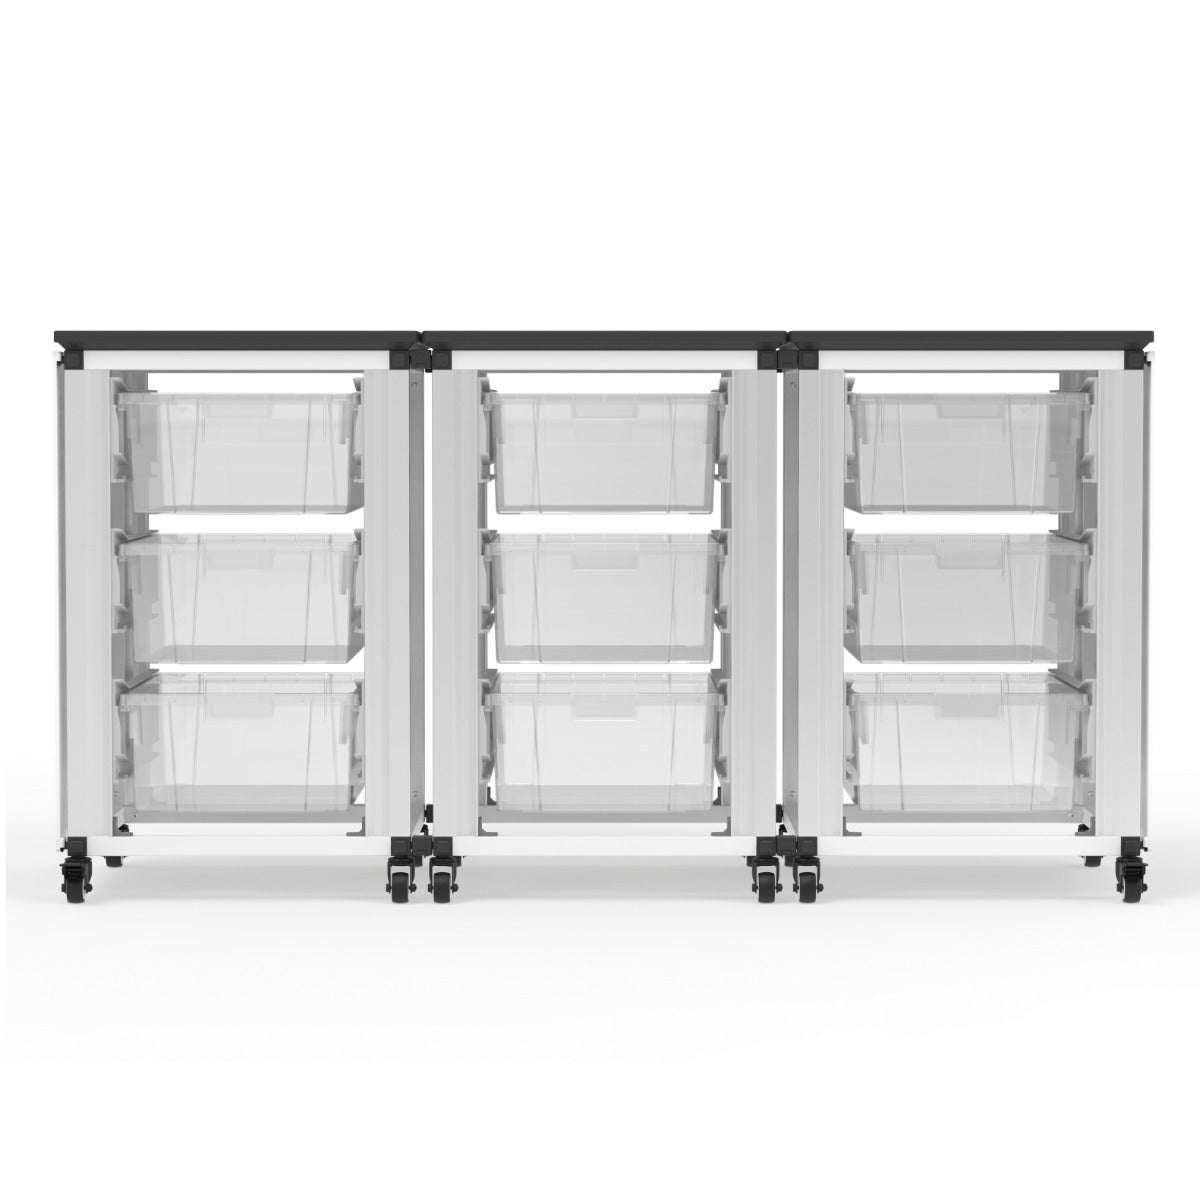 Luxor Modular Classroom Storage Cabinet - 3 side-by-side modules with 9 large bins (LUX-MBS-STR-31-9L) - SchoolOutlet